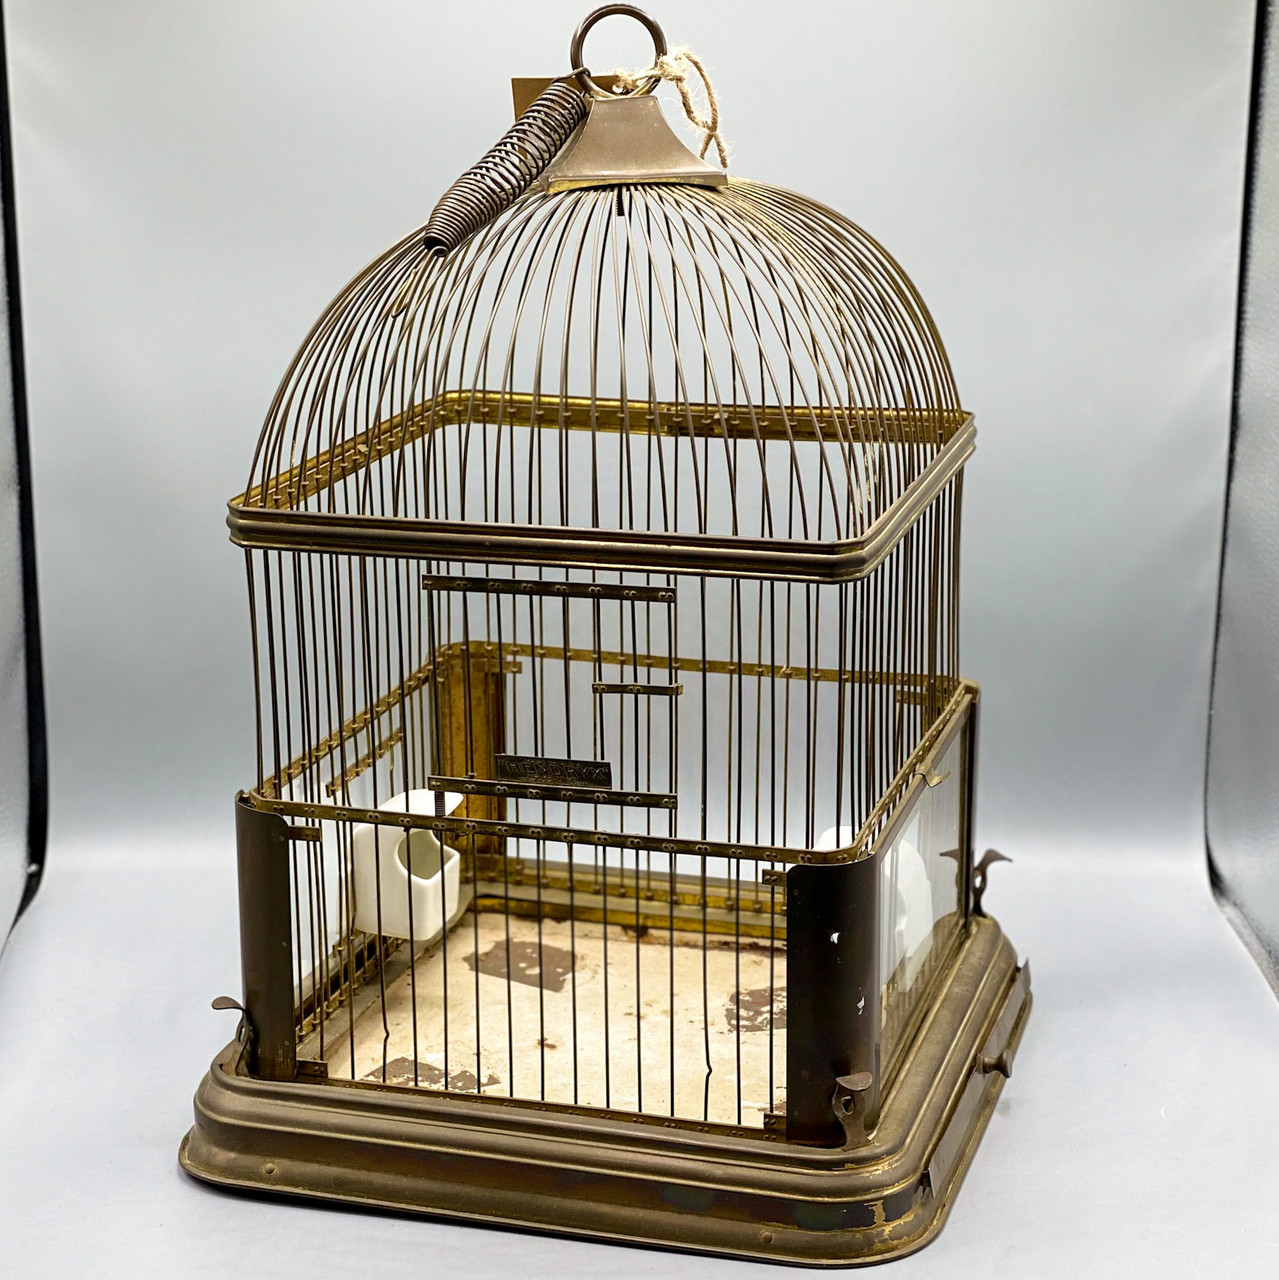 Authentic 1920s Hendryx Brass Bird Cage: Vintage Collector's